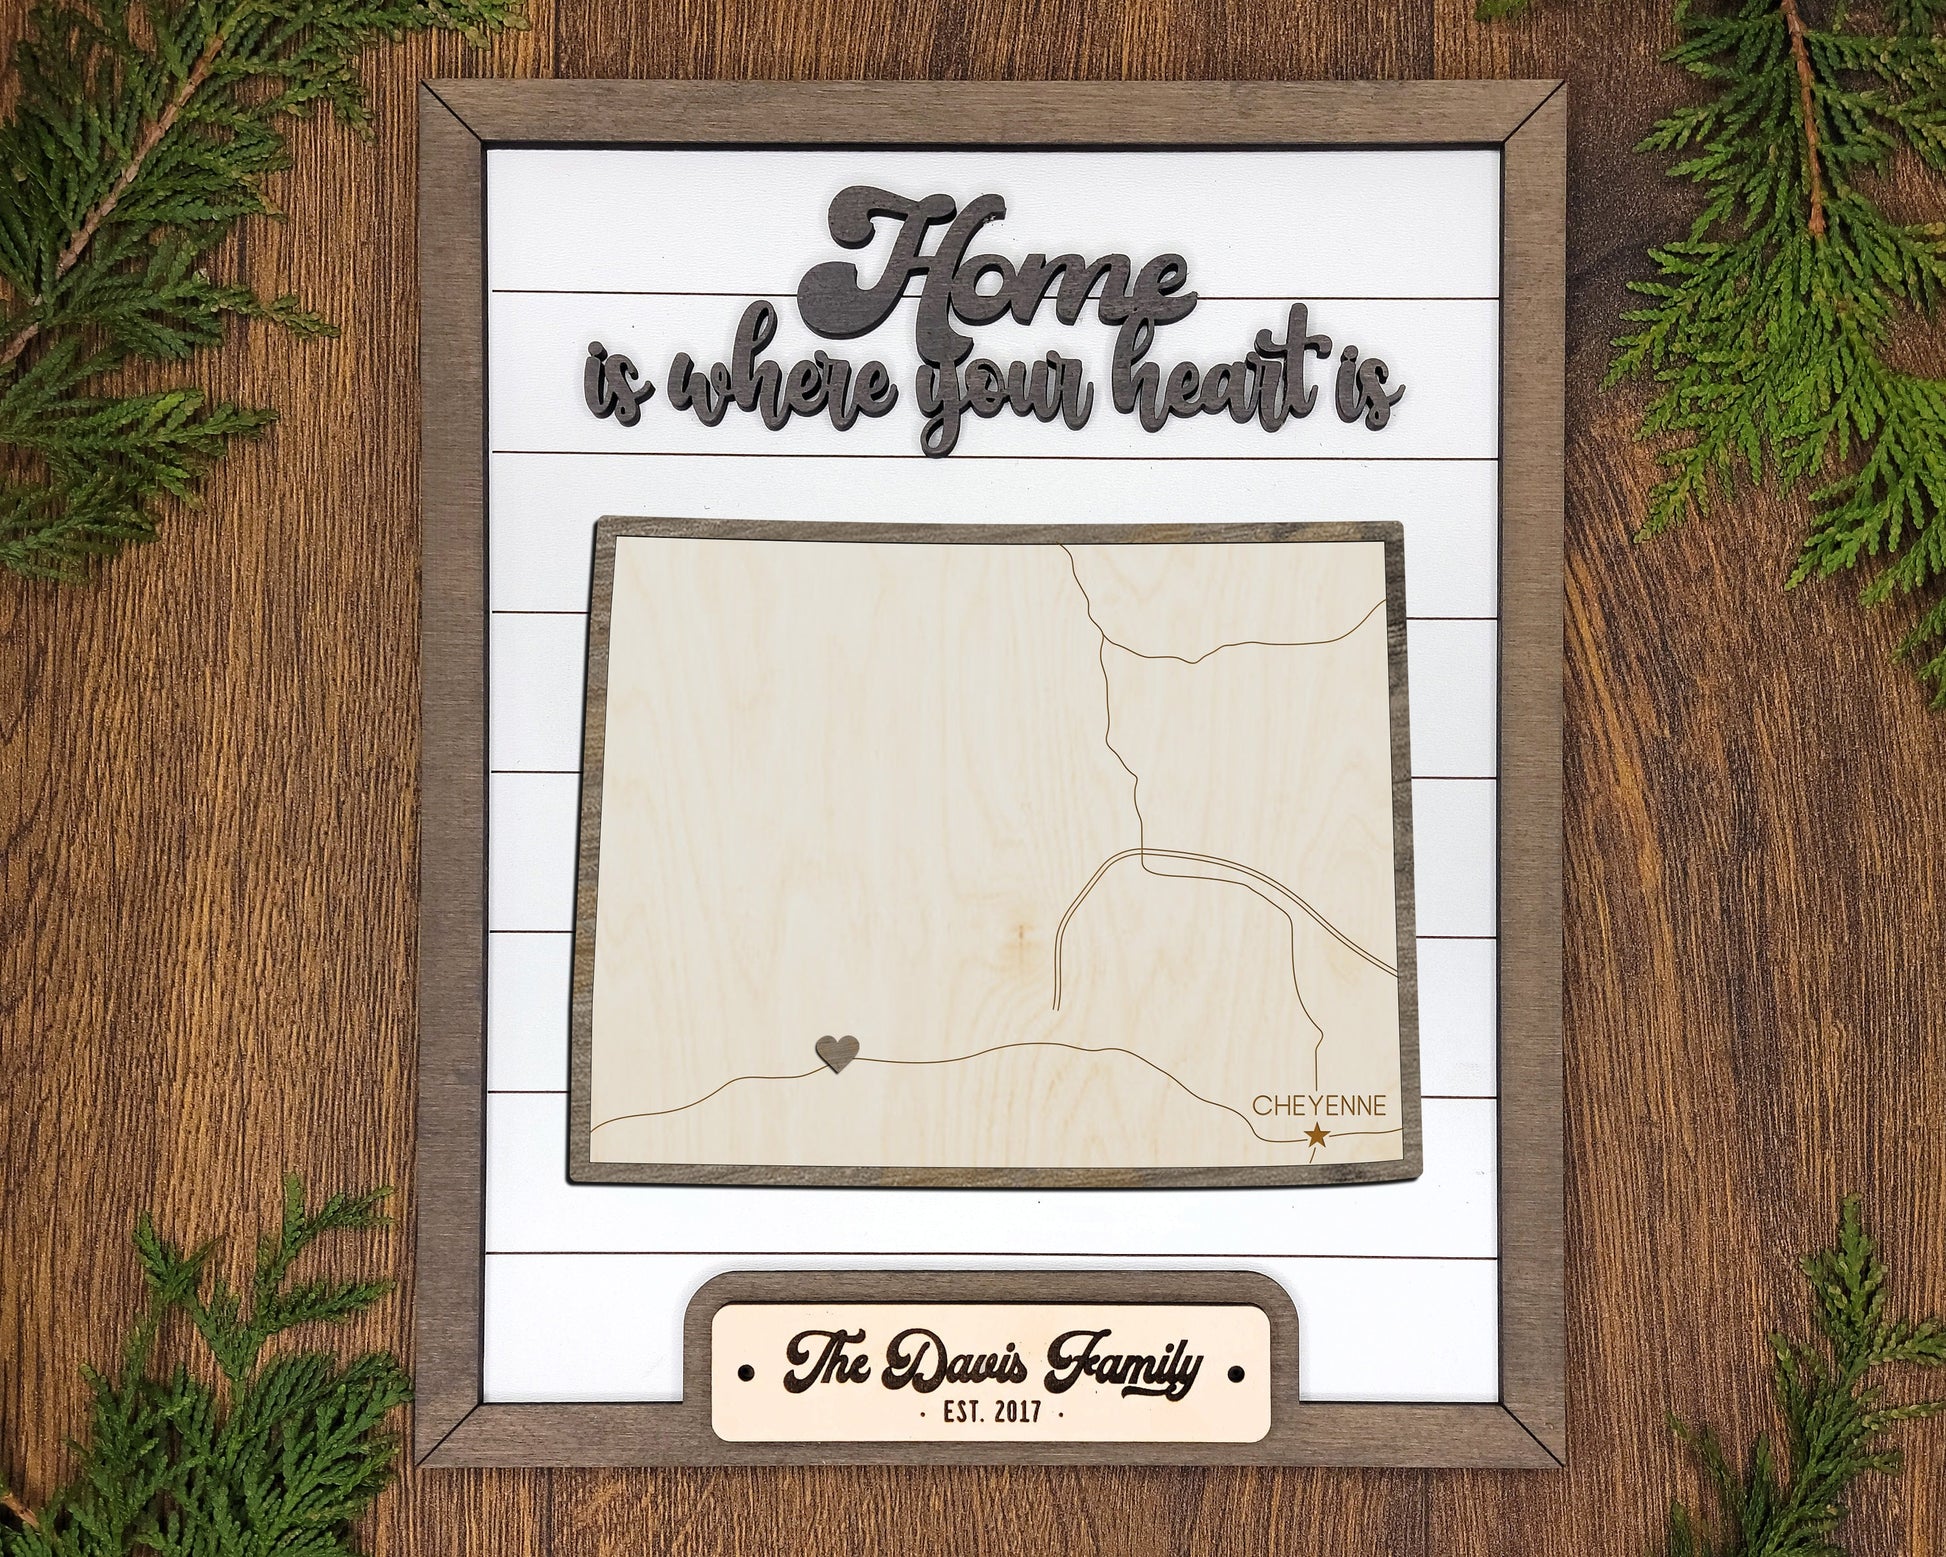 The Wyoming Frame - 13 text options, 12 backgrounds, 25 icons Included - Make over 7,500 designs - Glowforge & Lightburn Tested